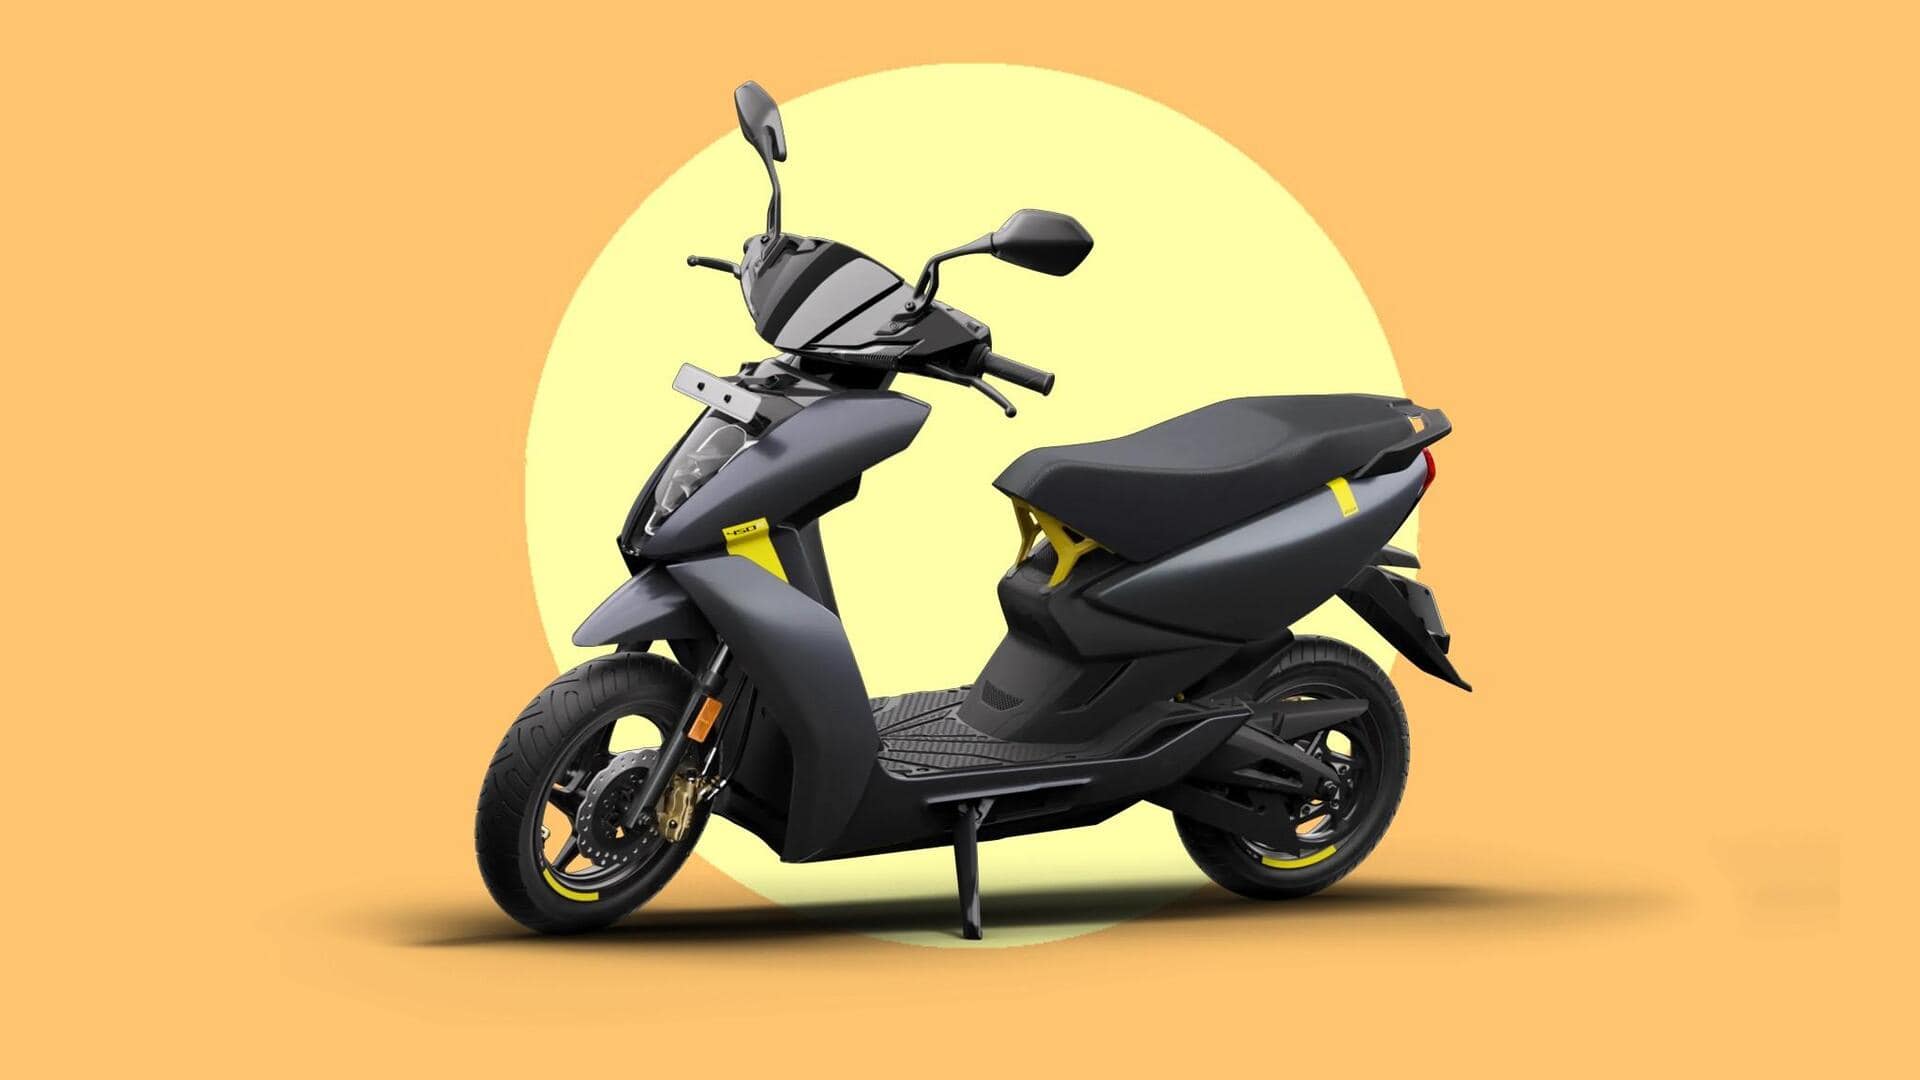 Ather bosses reveal details of upcoming Rizta EV